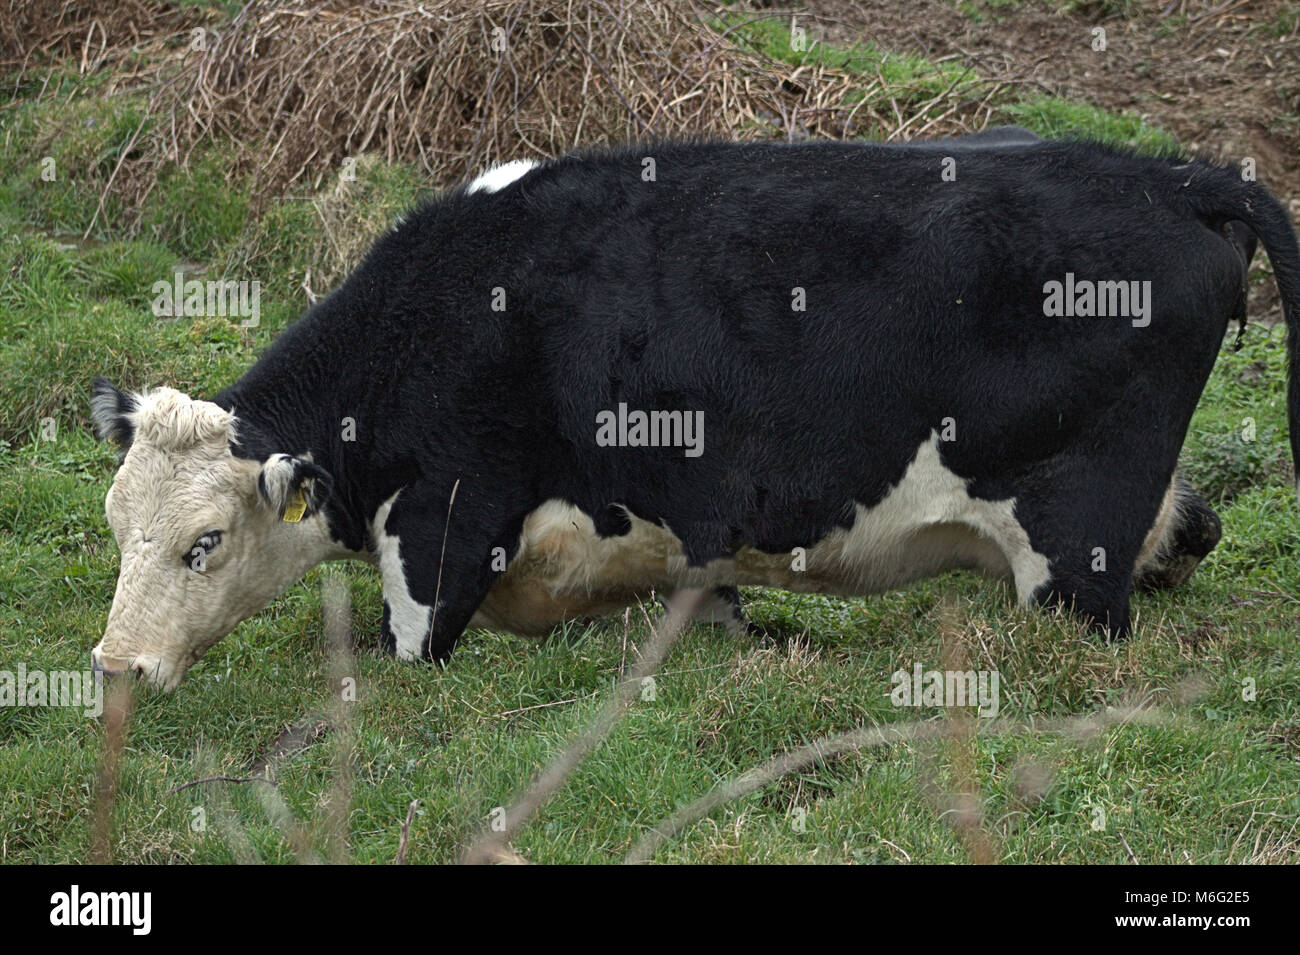 The cow had come near a swampy part of the field to drink and got stuck fast. Stock Photo